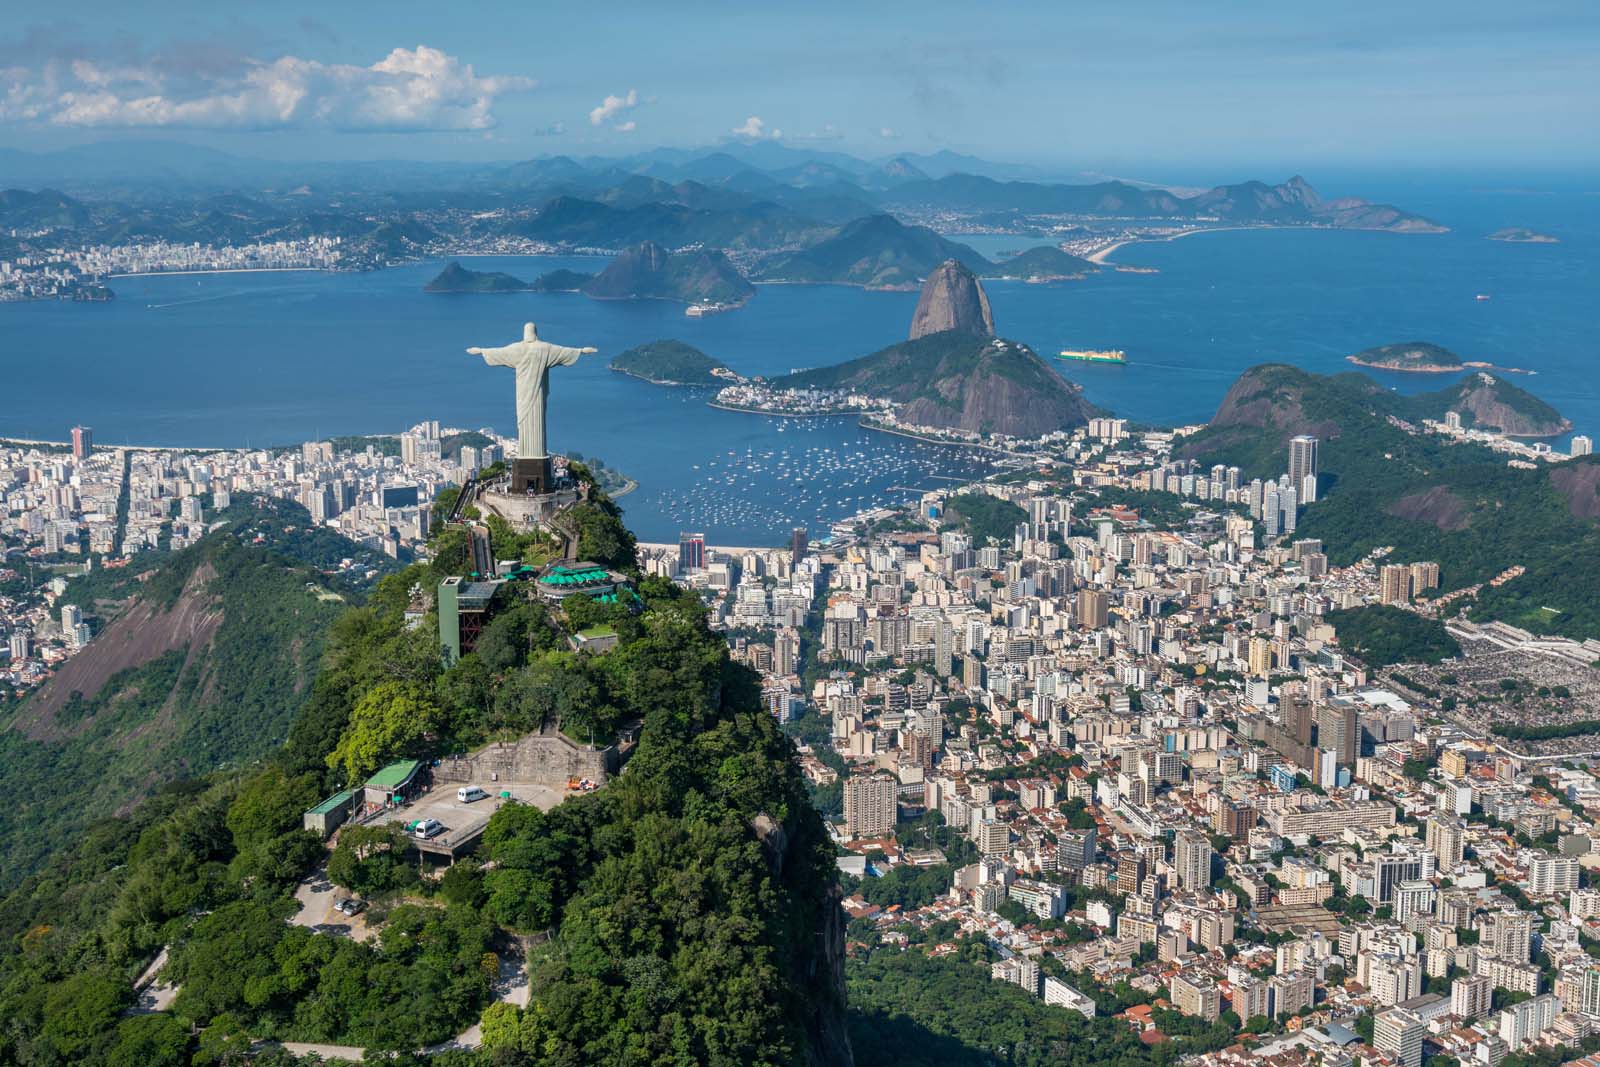 christ the redeemer was named one of the new seven wonders of the world